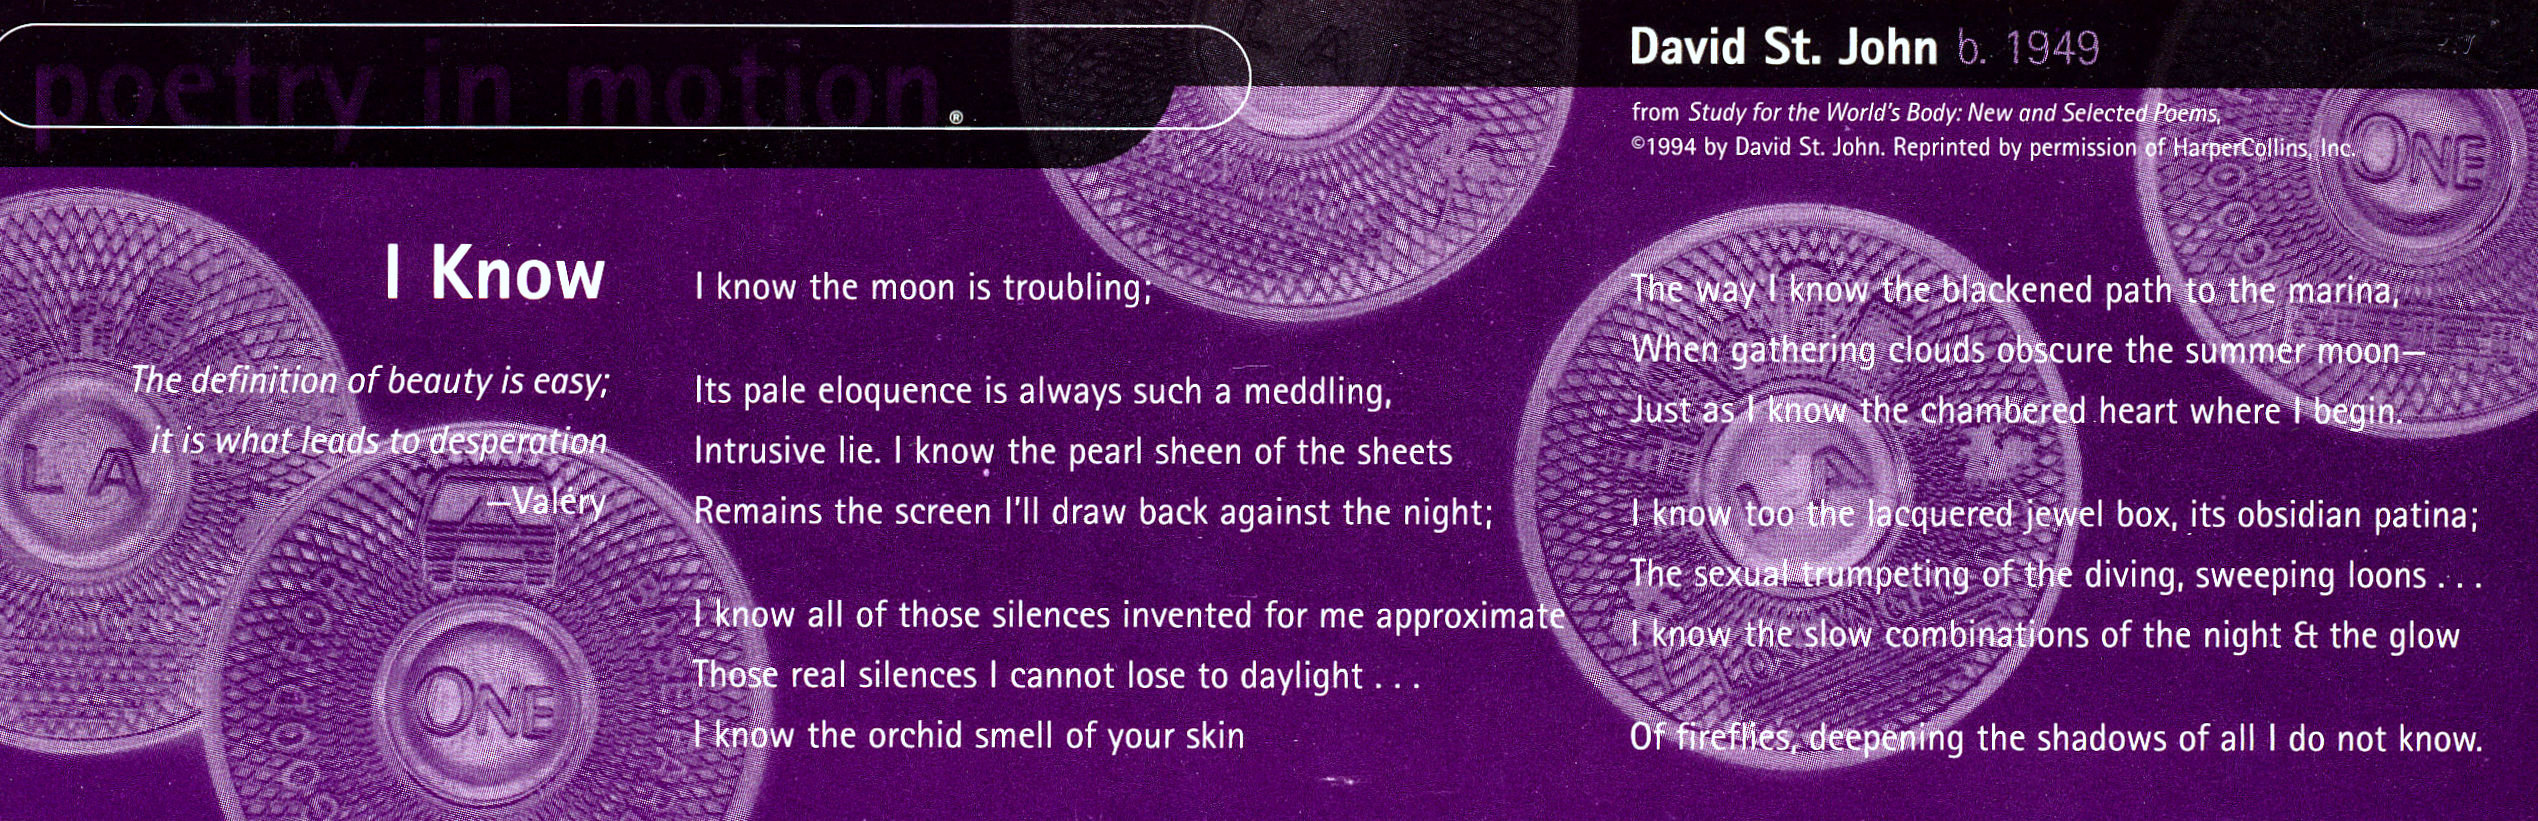 A purple poster decorated with Los Angeles transit tokens features a poem titled I Know, by David St. John.